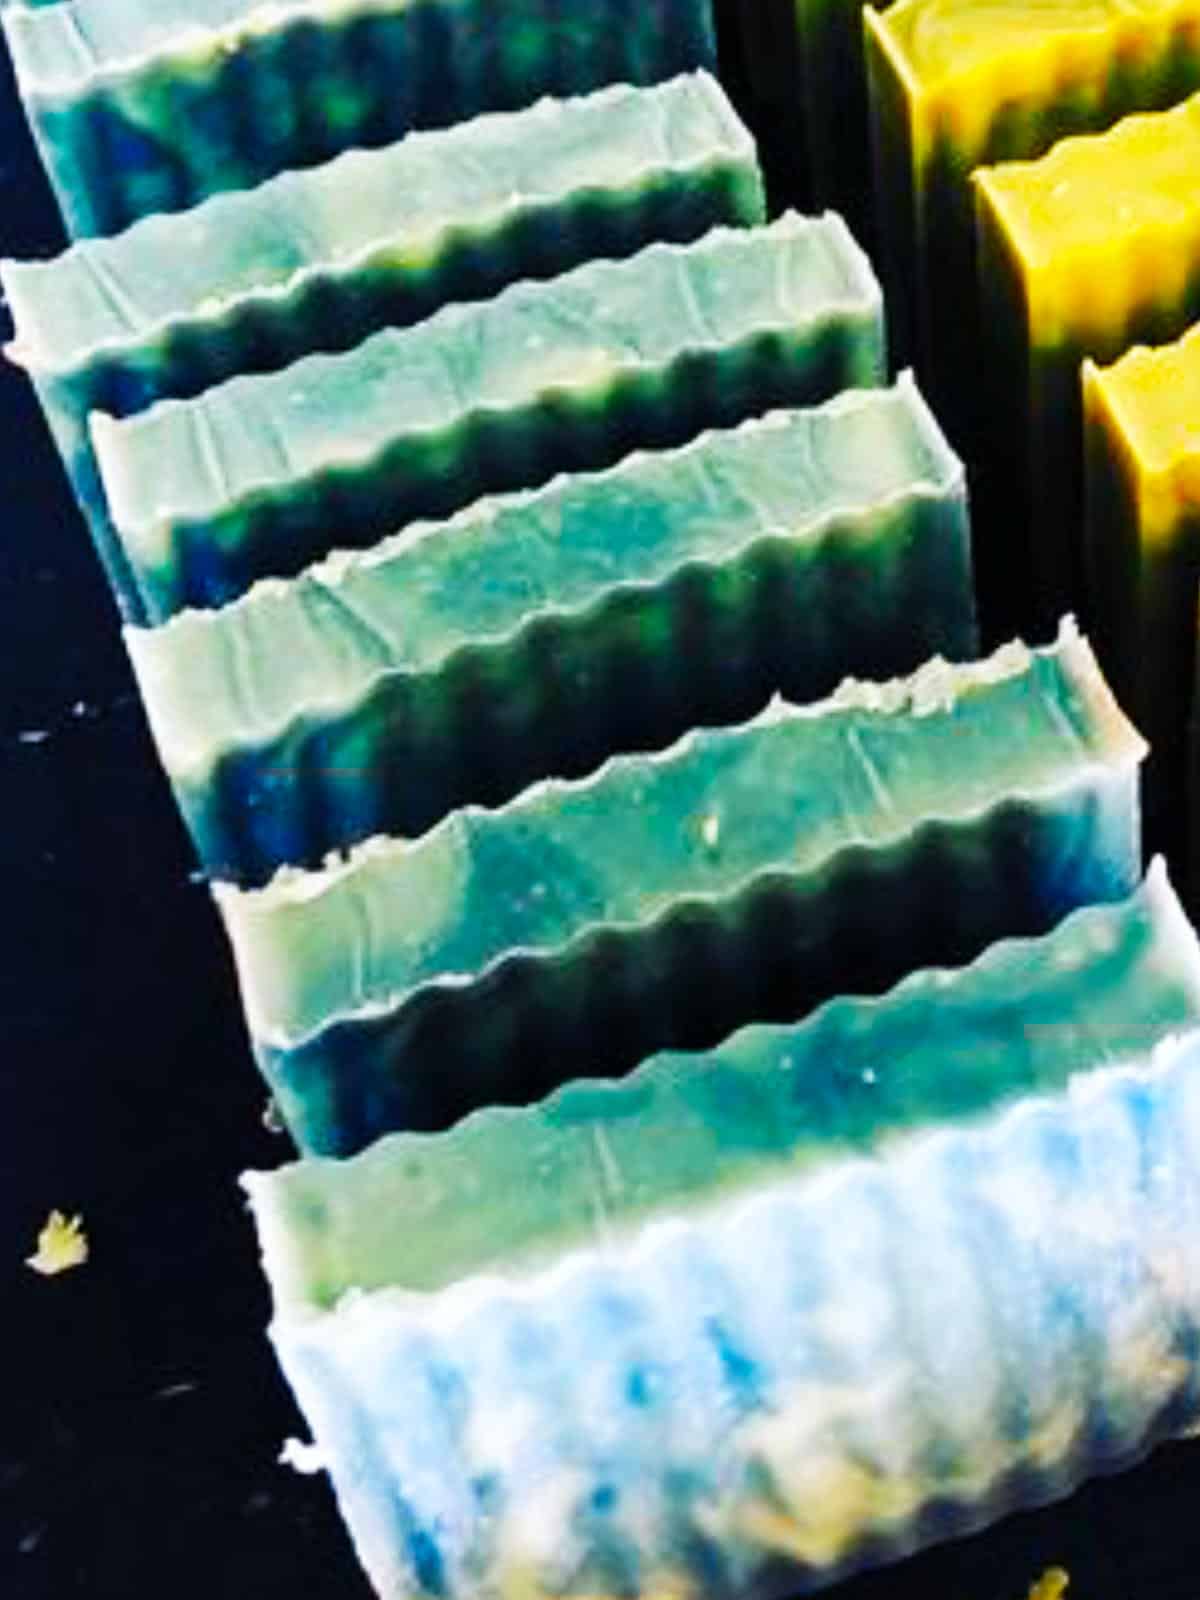 Sliced bars of cold process soap made from grocery store oils.